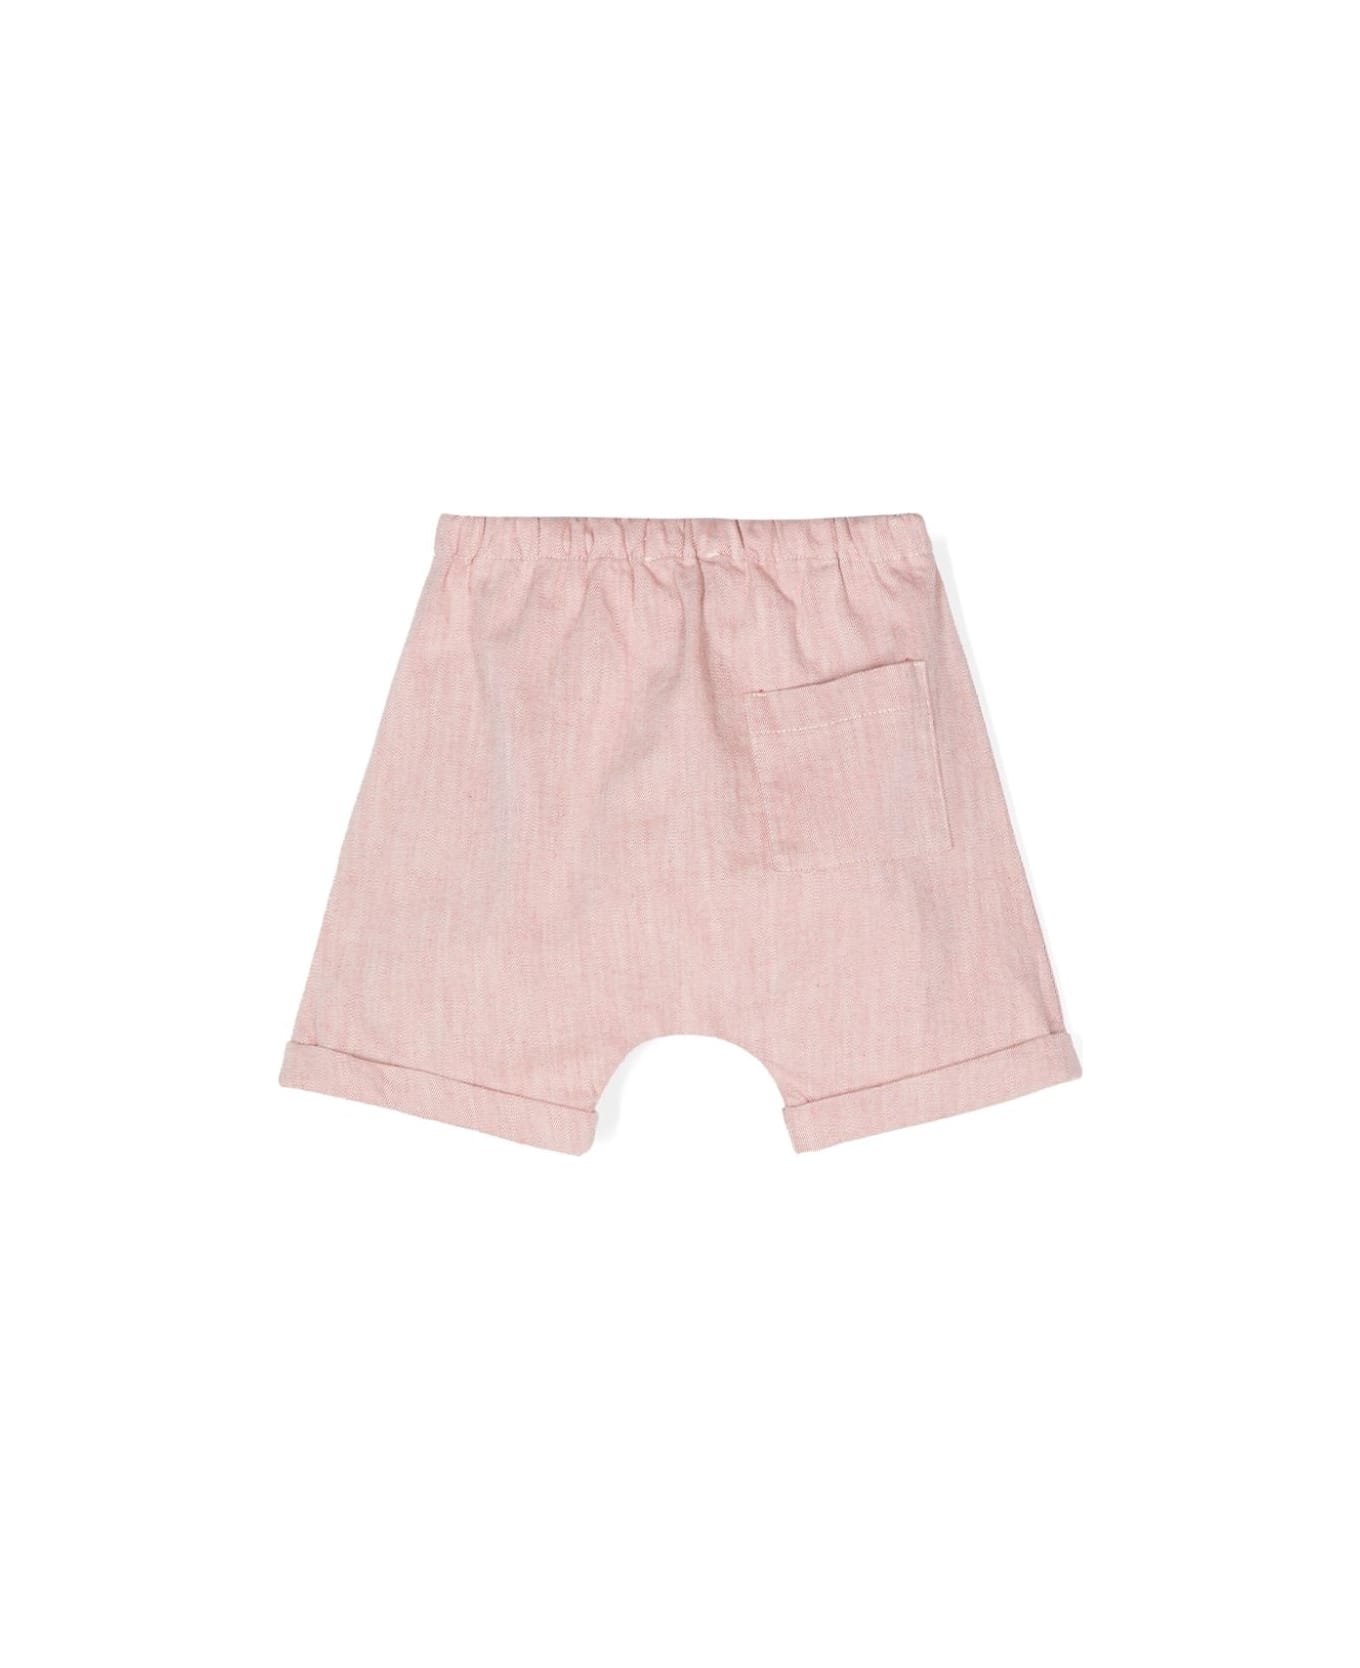 Zhoe & Tobiah Shorts Con Coulisse - Pink ボトムス